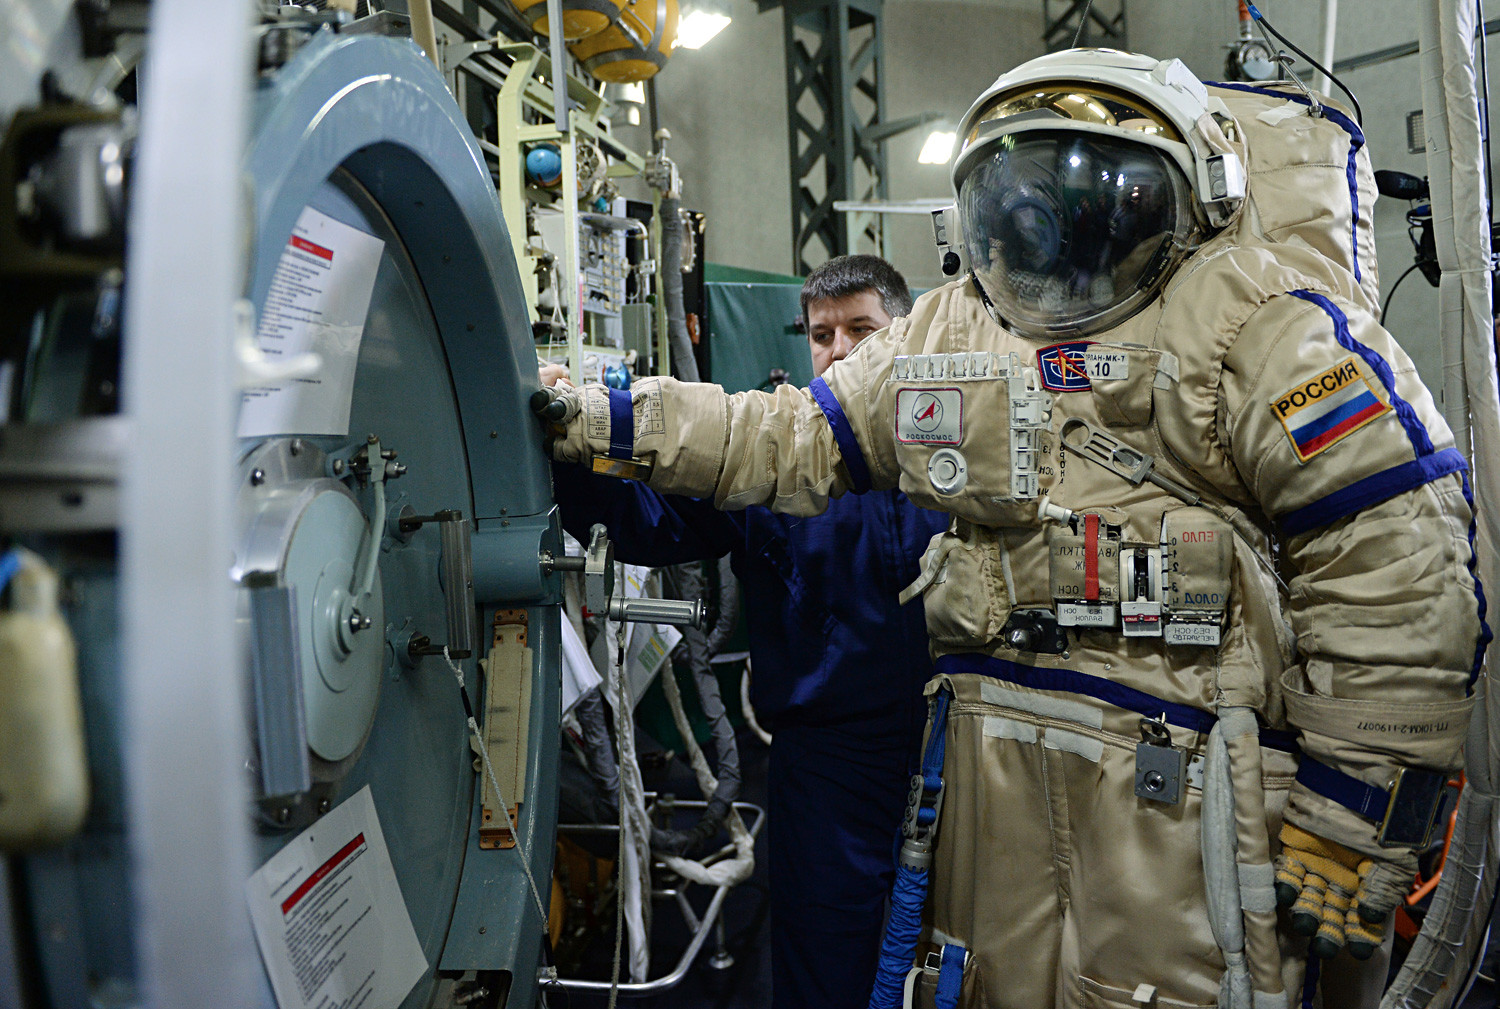 An output hatch VL-1 of one of the modules of the ISS and an Orlan MK Russian spacewalking spacesuit at the Yuri Gagarin Cosmonaut Training Center.